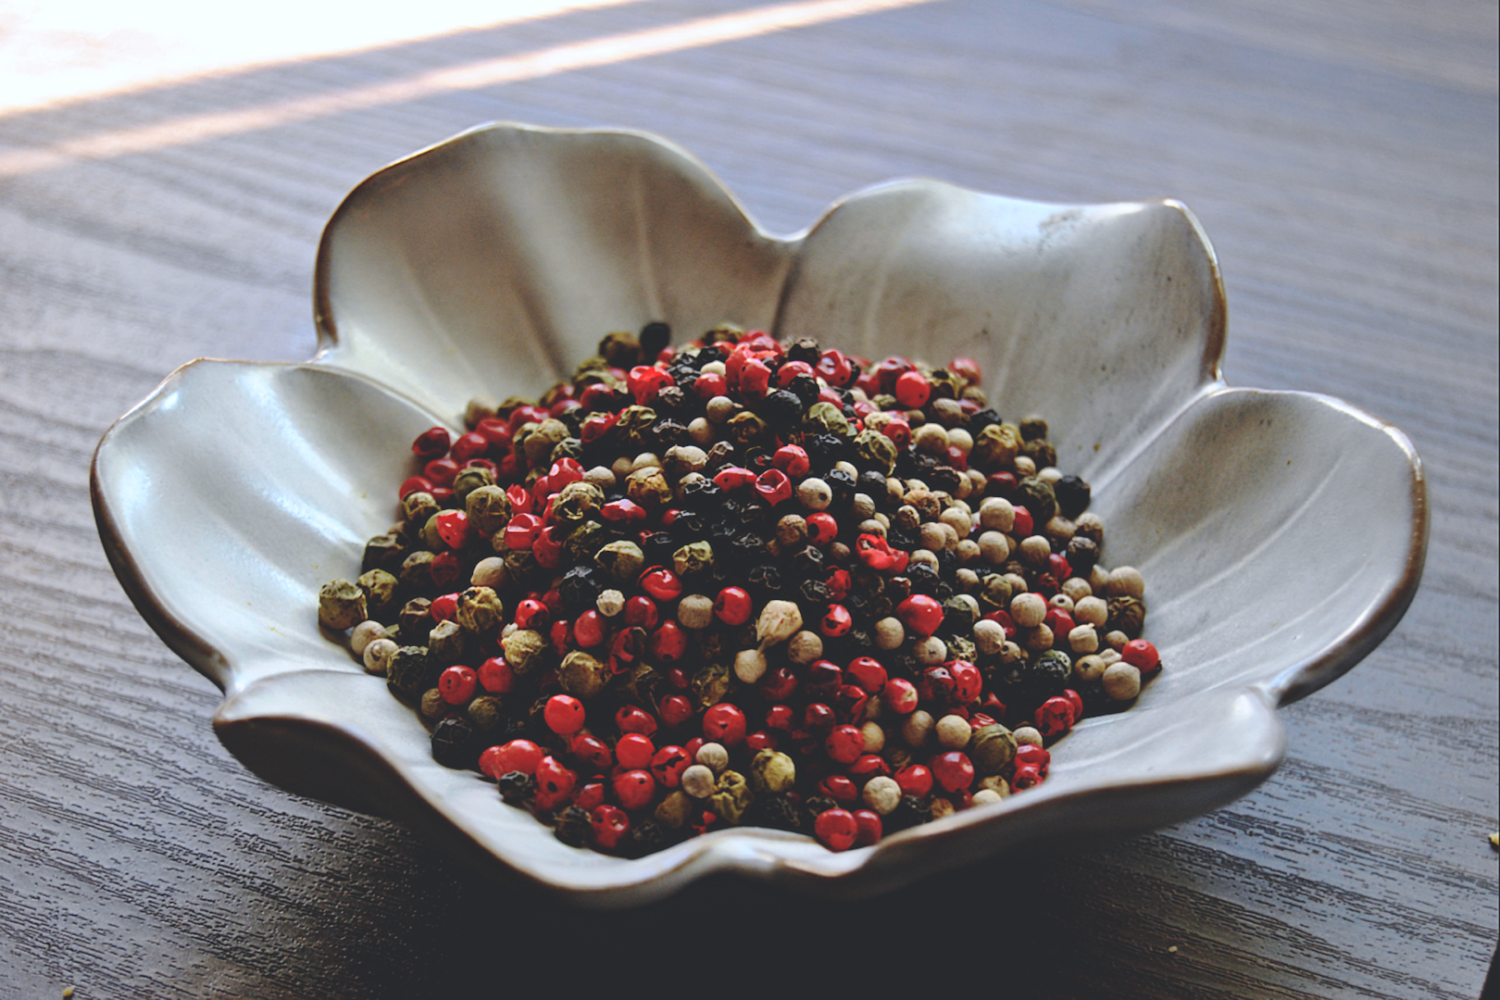 An assorted blend of pink, white, green and black peppercorns rests in a white, flower shaped dish on a wooden surface.